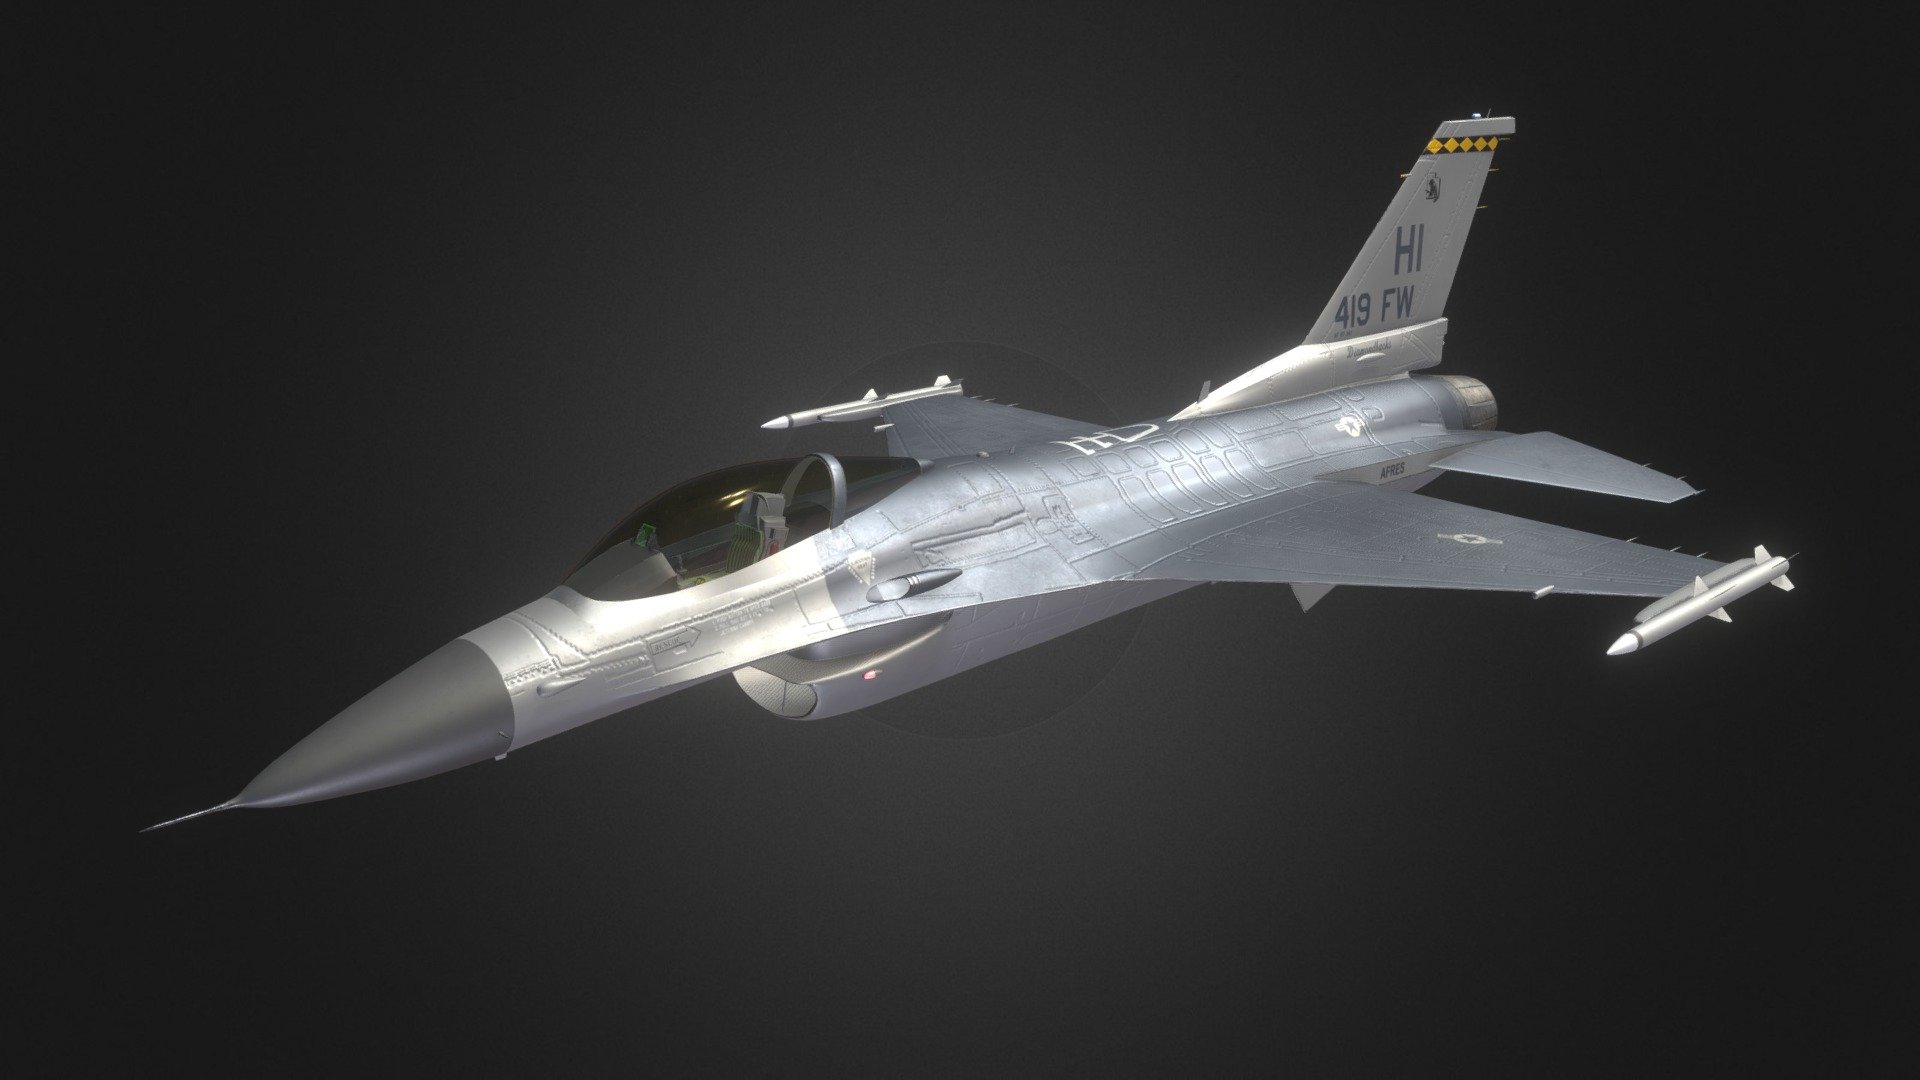 This is my latest creation. A US Air Force F-16 Fighting Falcon from the Diamondbacks squadron!
I am verry proud of the end result! And glad it's done XD(took forever).

Artstation post: https://www.artstation.com/artwork/RnDO9r - F-16 Fighting Falcon Diamondbacks - 3D model by Rens_Hoedeman 3d model